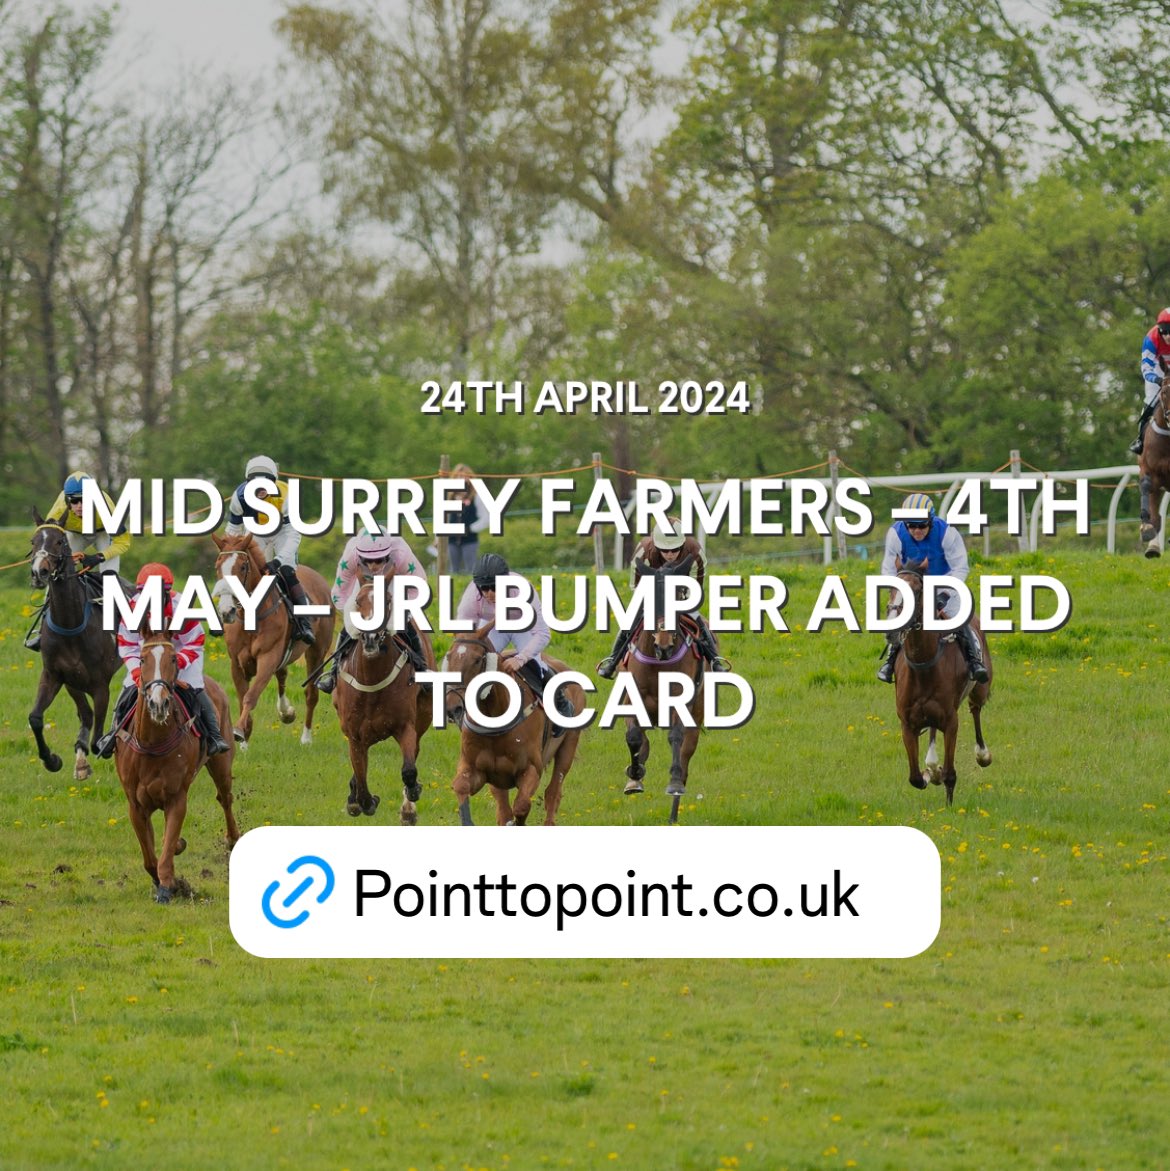 MID SURREY FARMERS 4TH MAY JRL BUMPER ADDED TO CARD Mid Surrey Farmers at Godstone on Saturday 4th May, has a JRL sponsored flat race added. It will be the last race on the card due off at 5.30 pm. Full race conditions pointtopoint.co.uk/news_articles/… @PointingSE #GoPointing